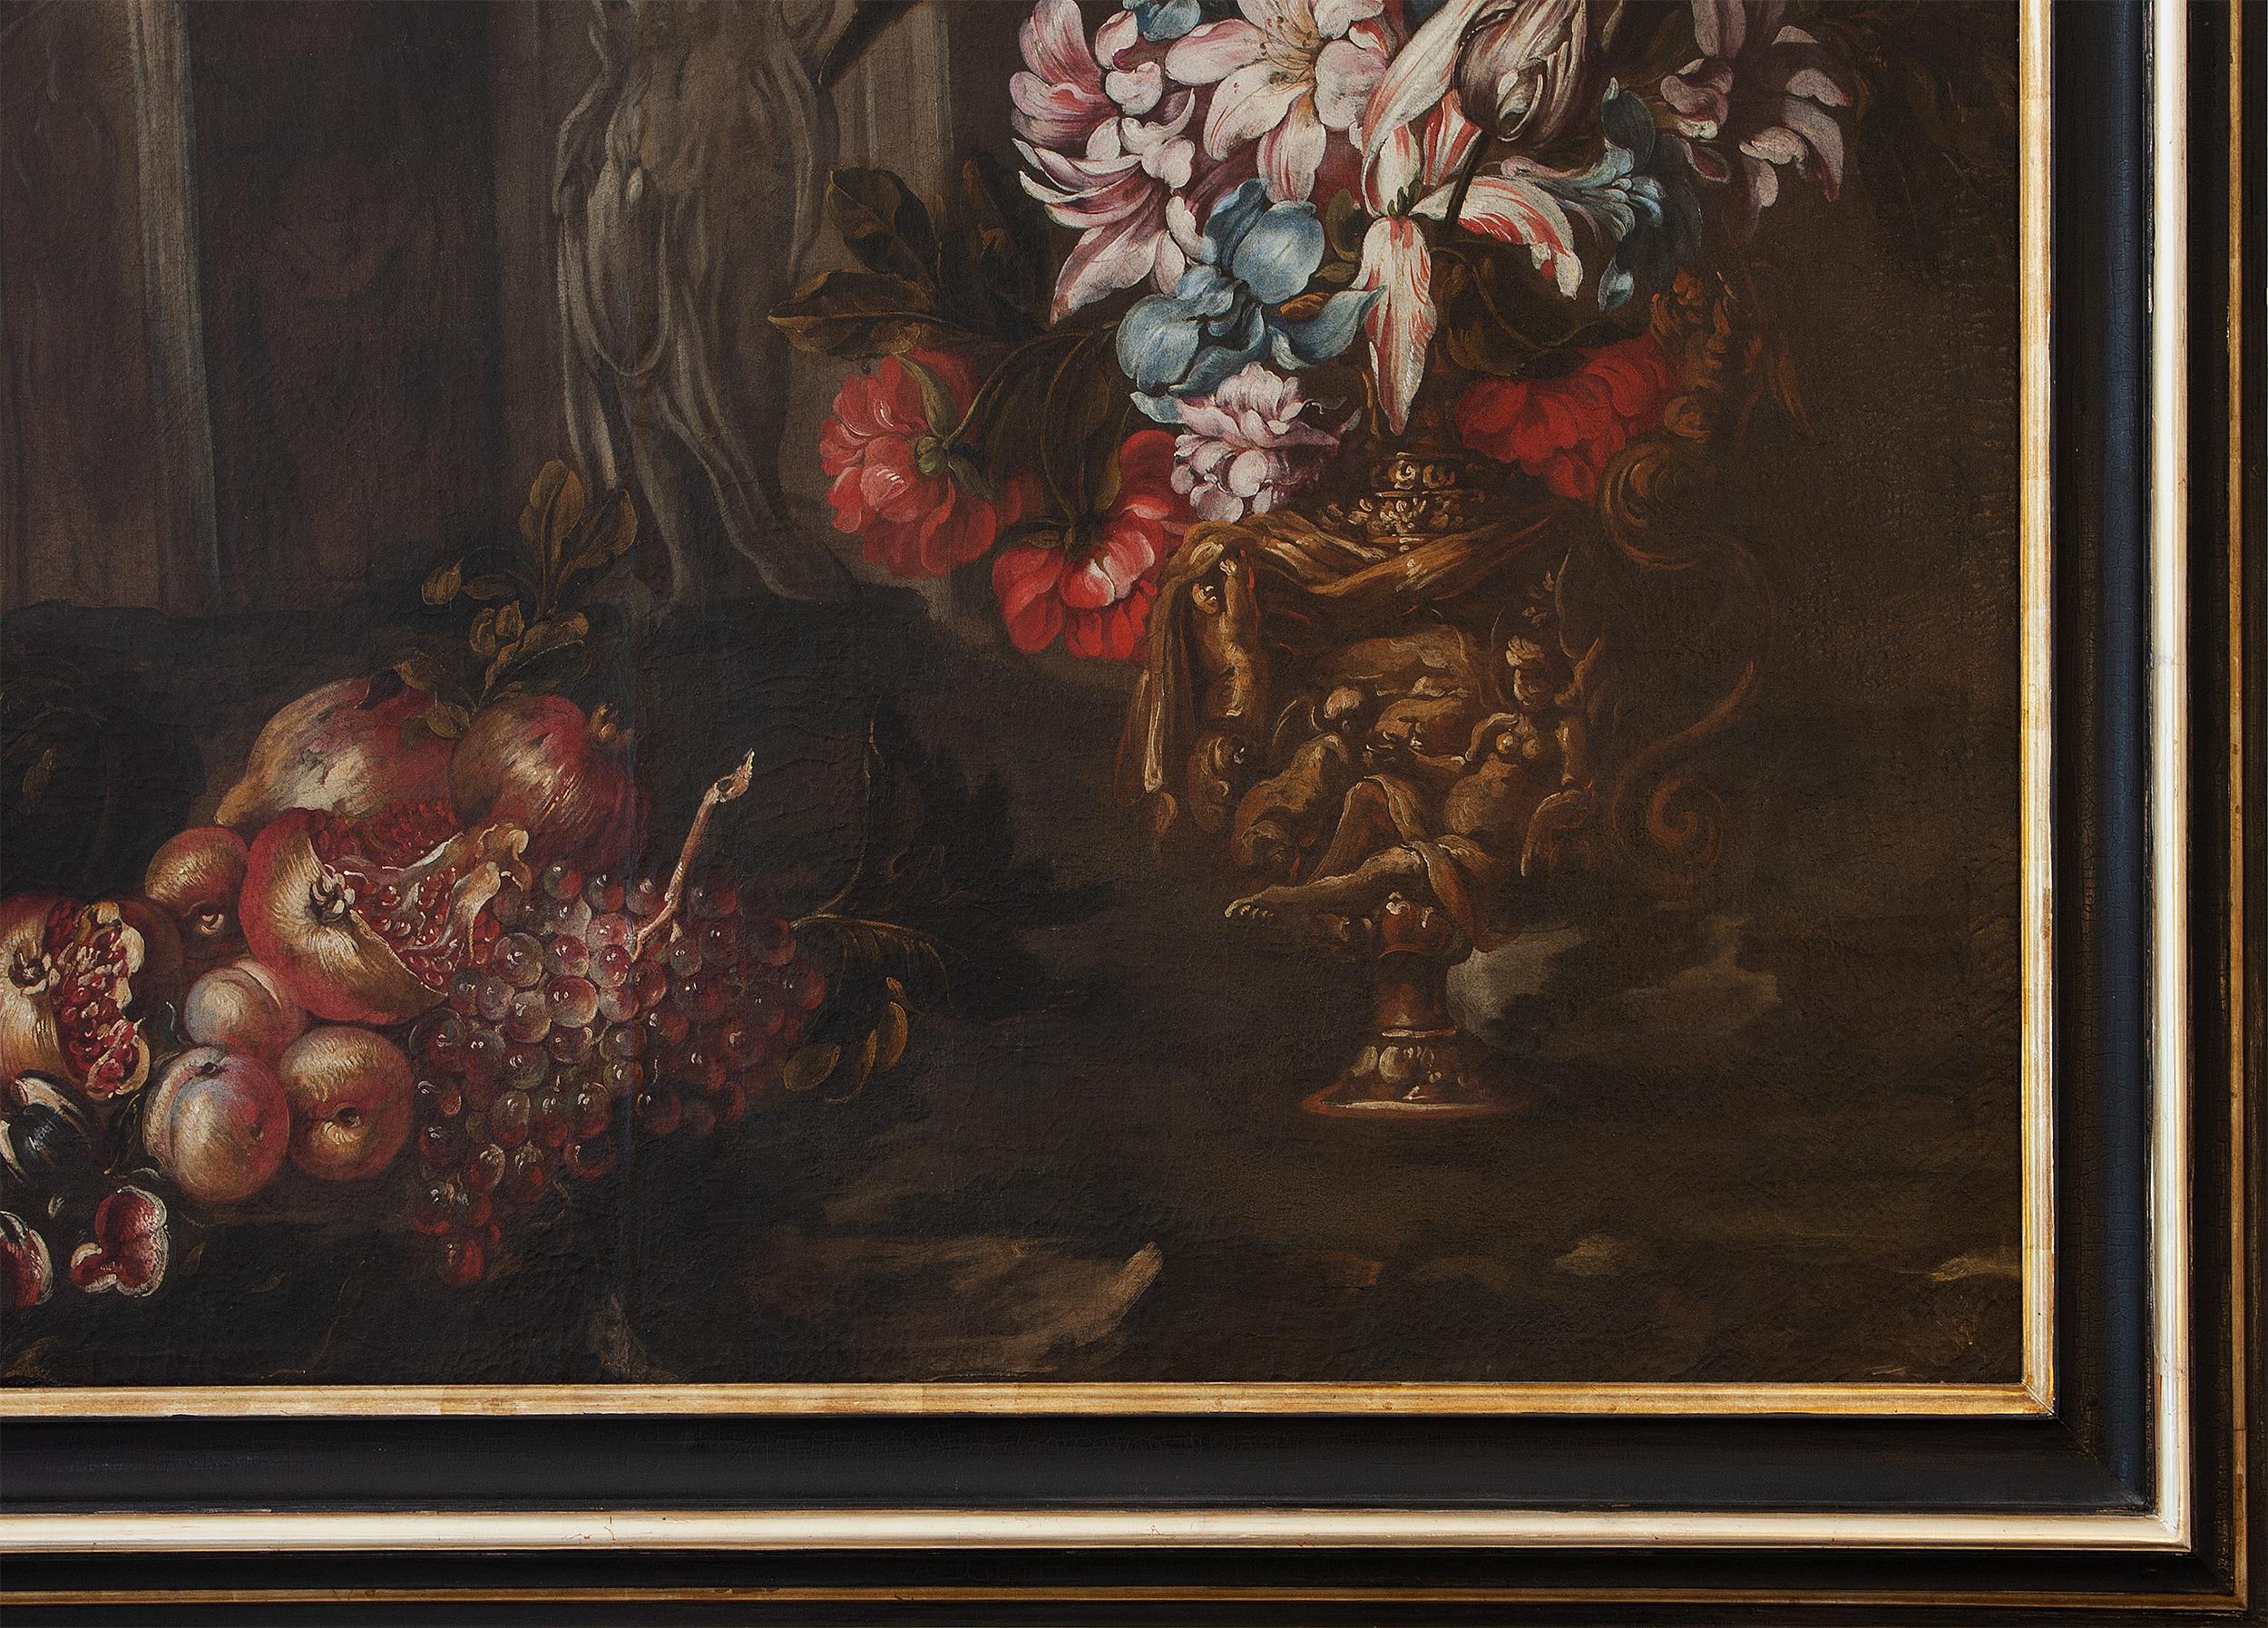 Still life with vase of flowers, fruits and architectural ruins  - Painting by Unknown